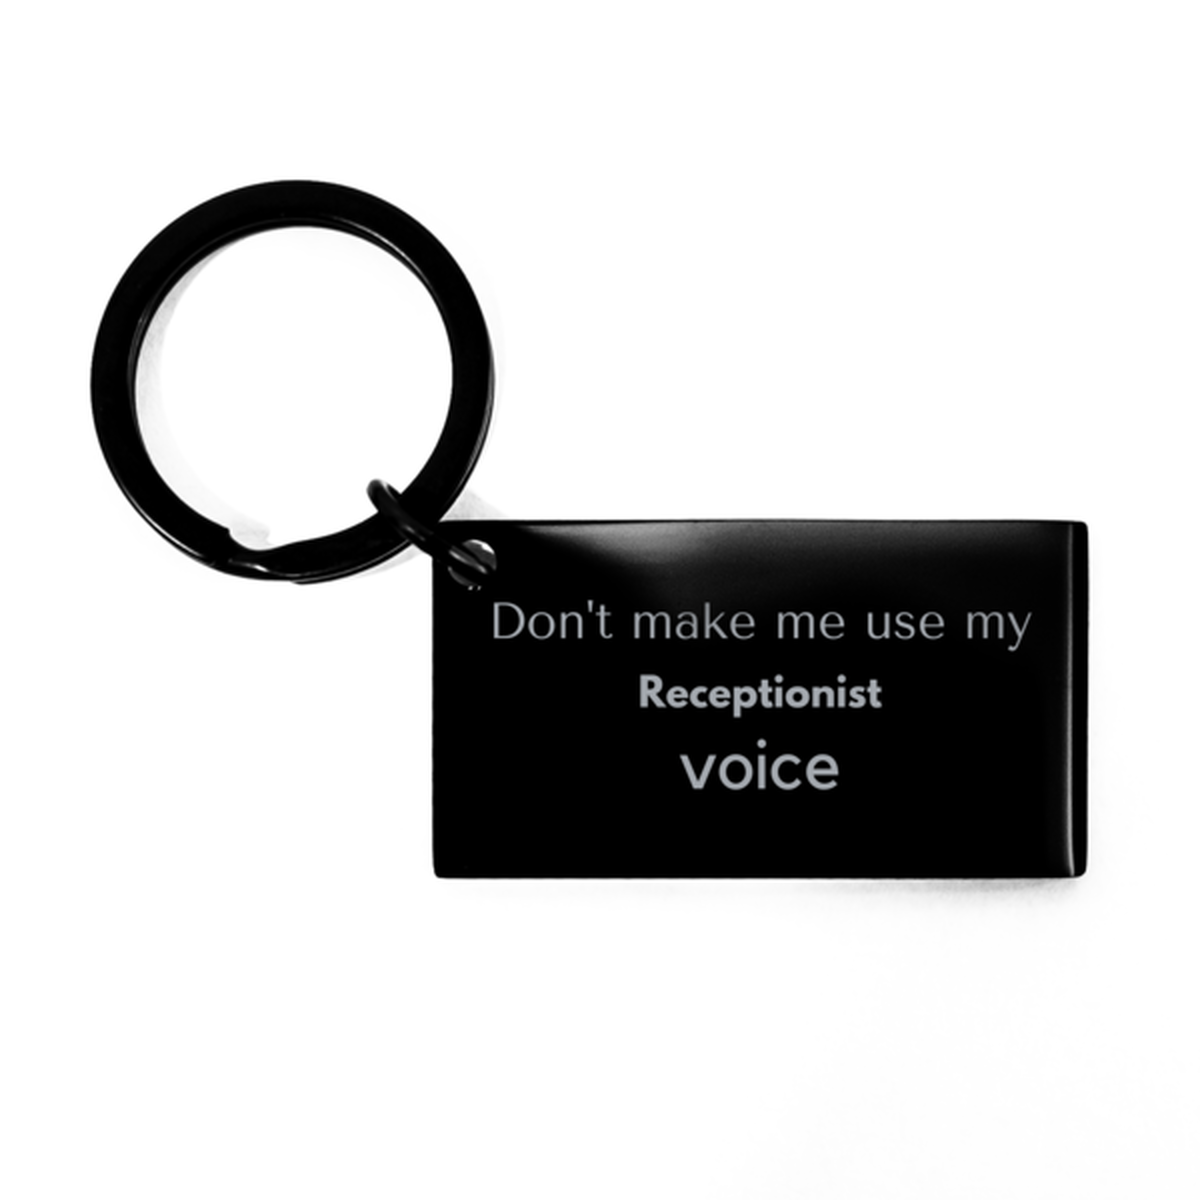 Don't make me use my Receptionist voice, Sarcasm Receptionist Gifts, Christmas Receptionist Keychain Birthday Unique Gifts For Receptionist Coworkers, Men, Women, Colleague, Friends